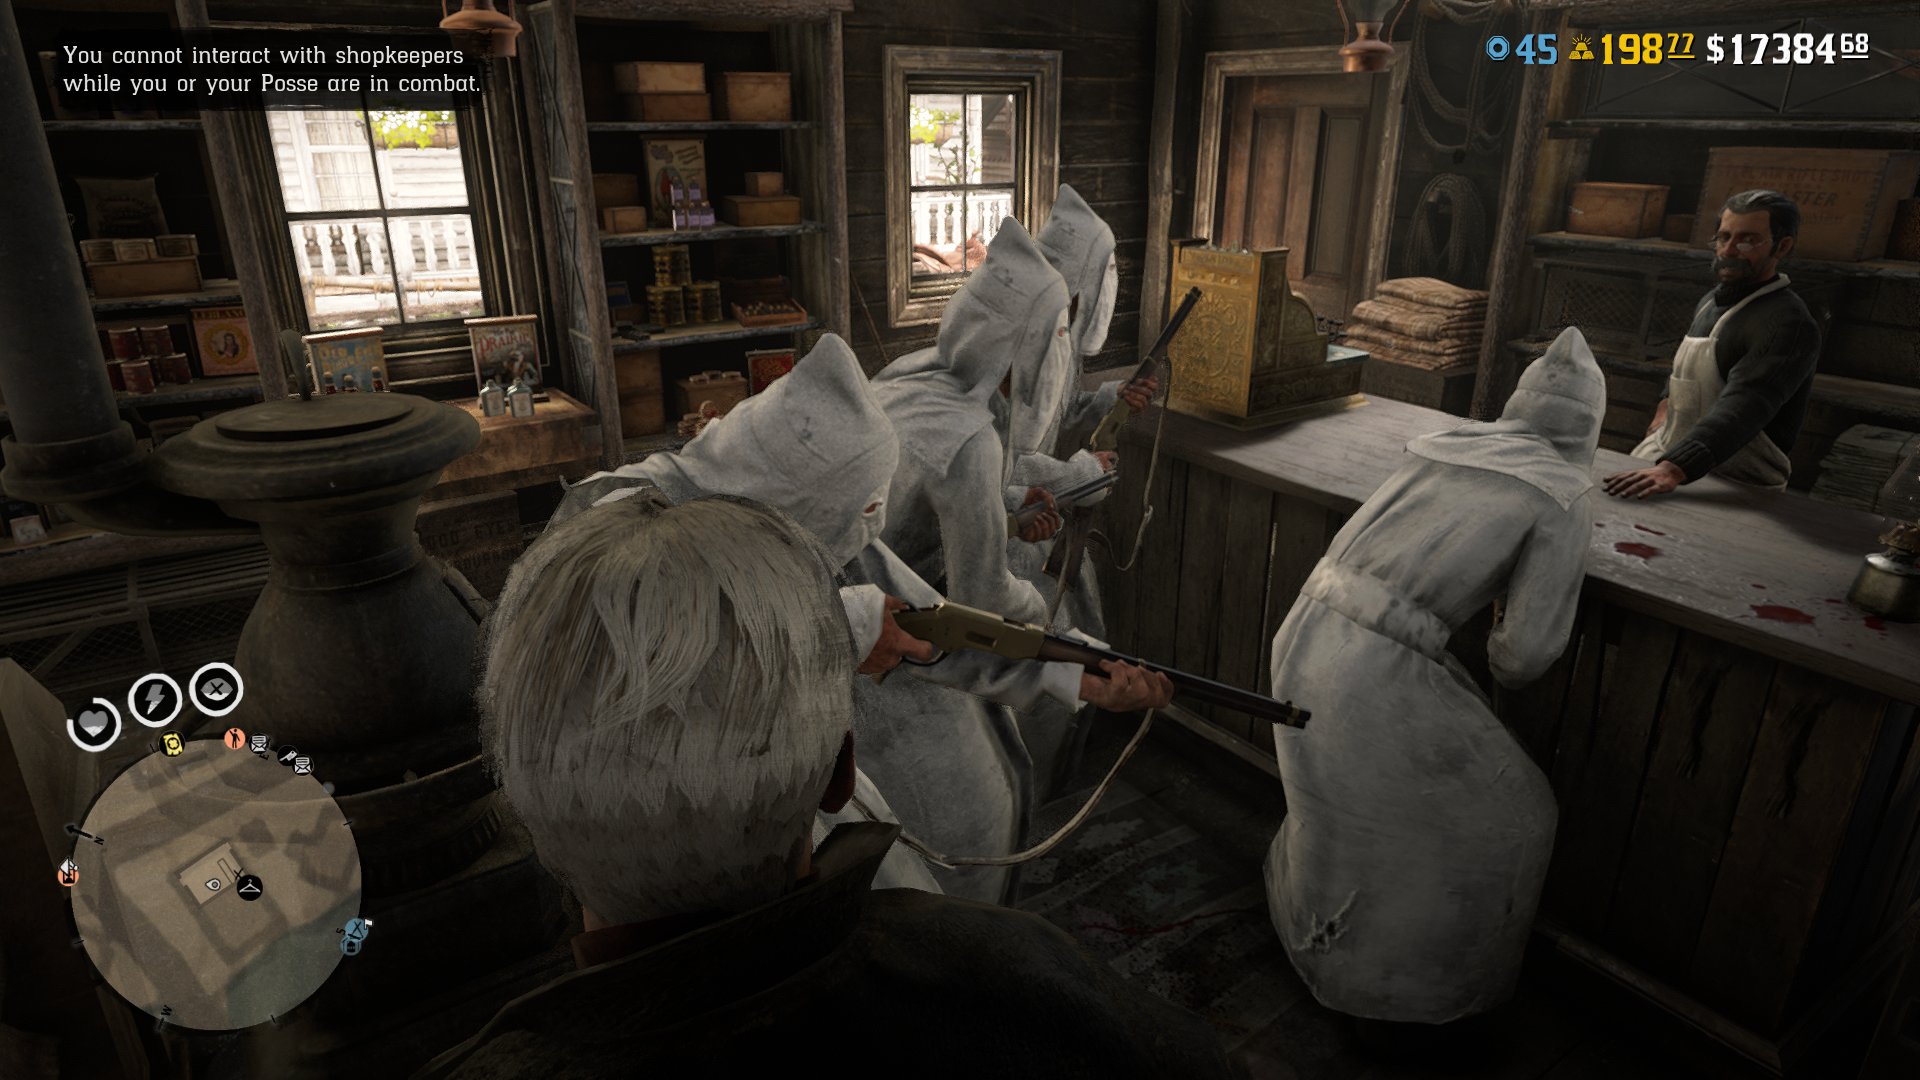 Players in Red Dead Online have been seeing the KKK spawned to harass them. (Image credit: @fanfusuzi)